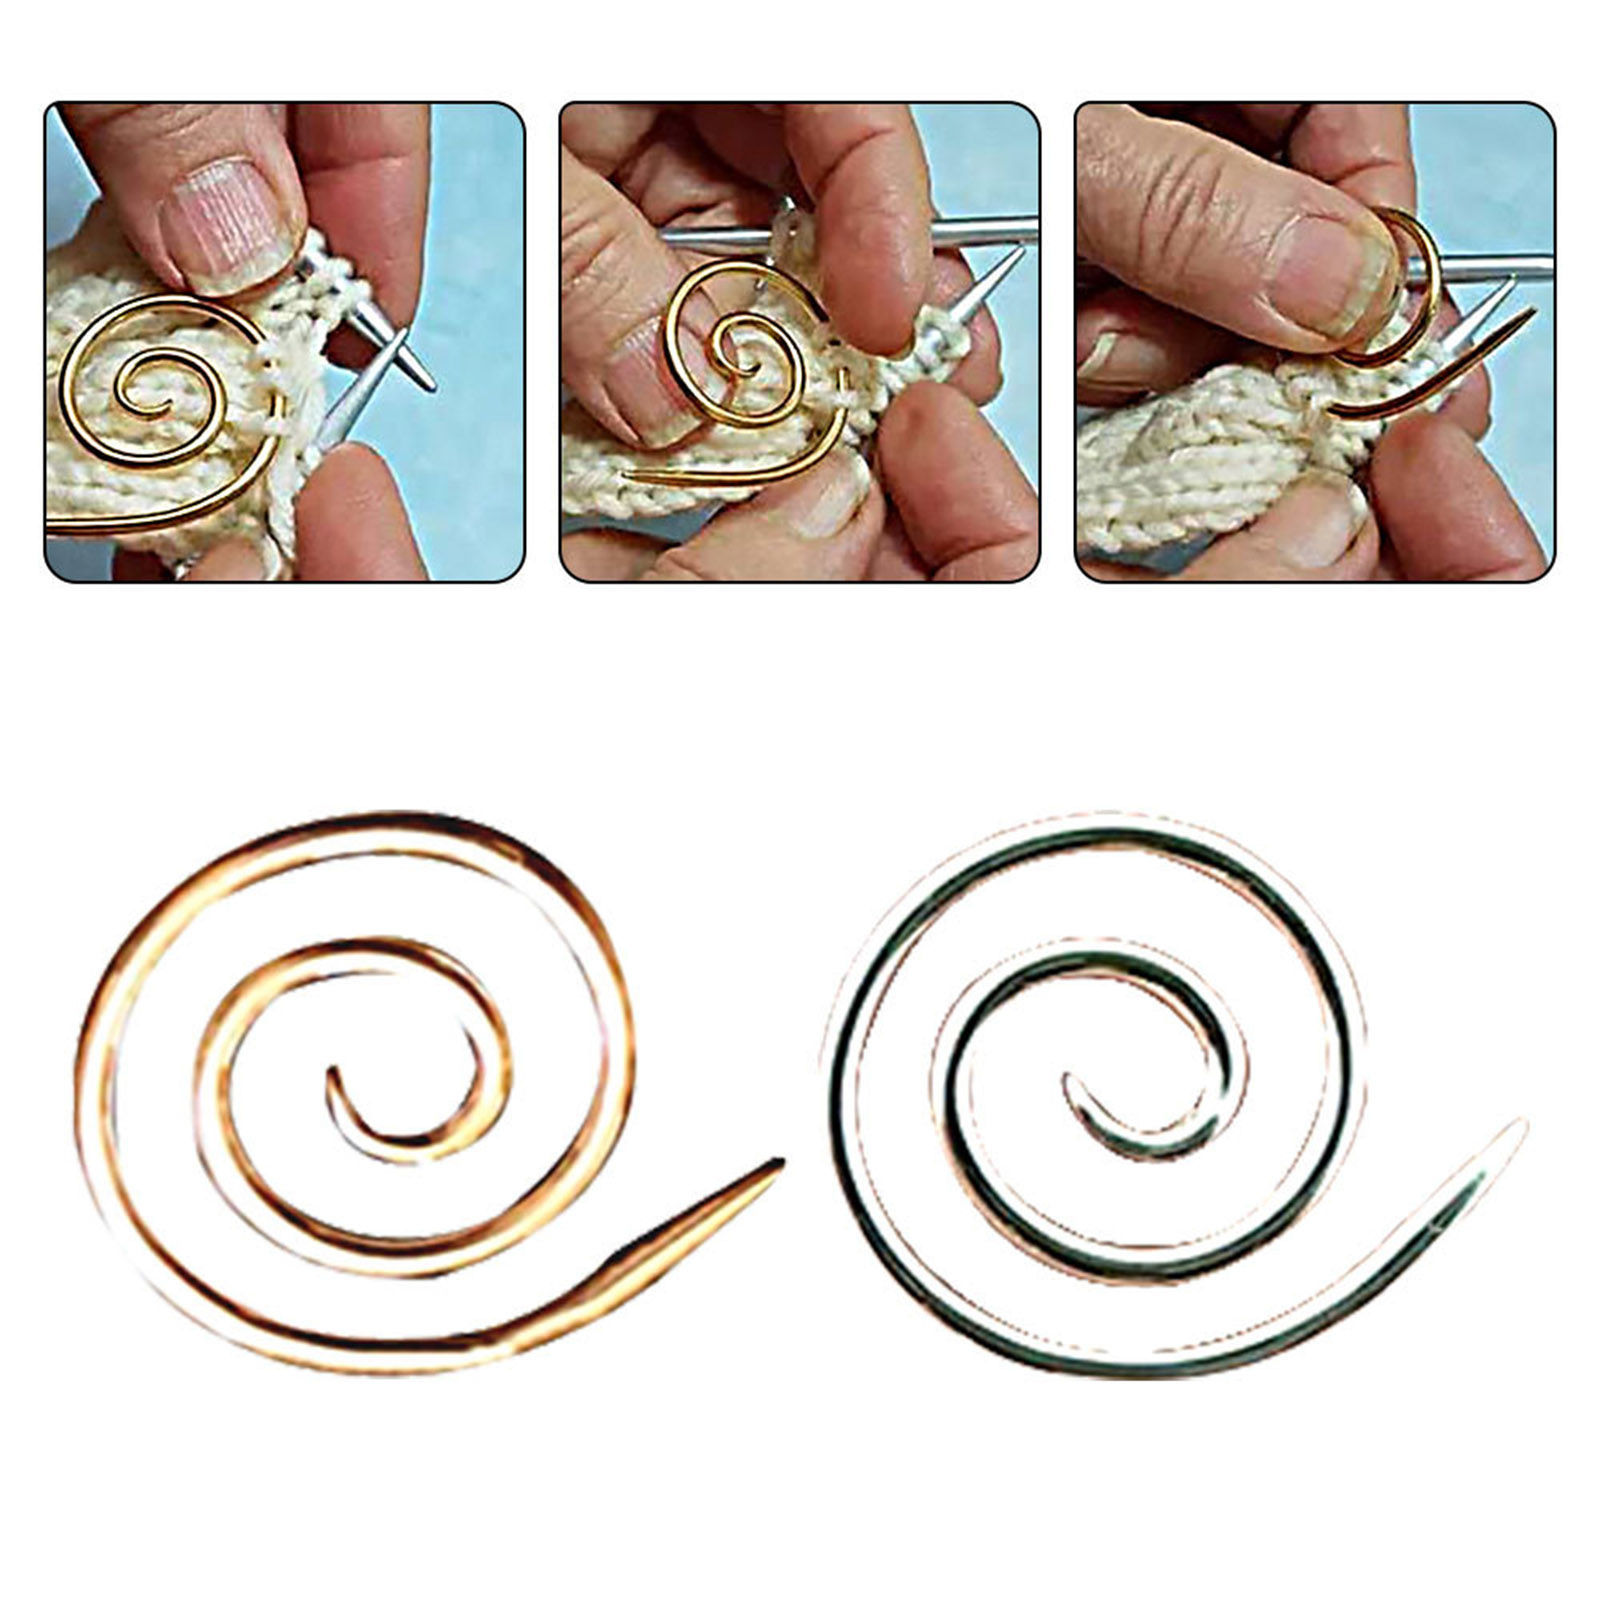 Picture of Alloy Knitting Needles Spiral Multicolor 4cm x 4cm